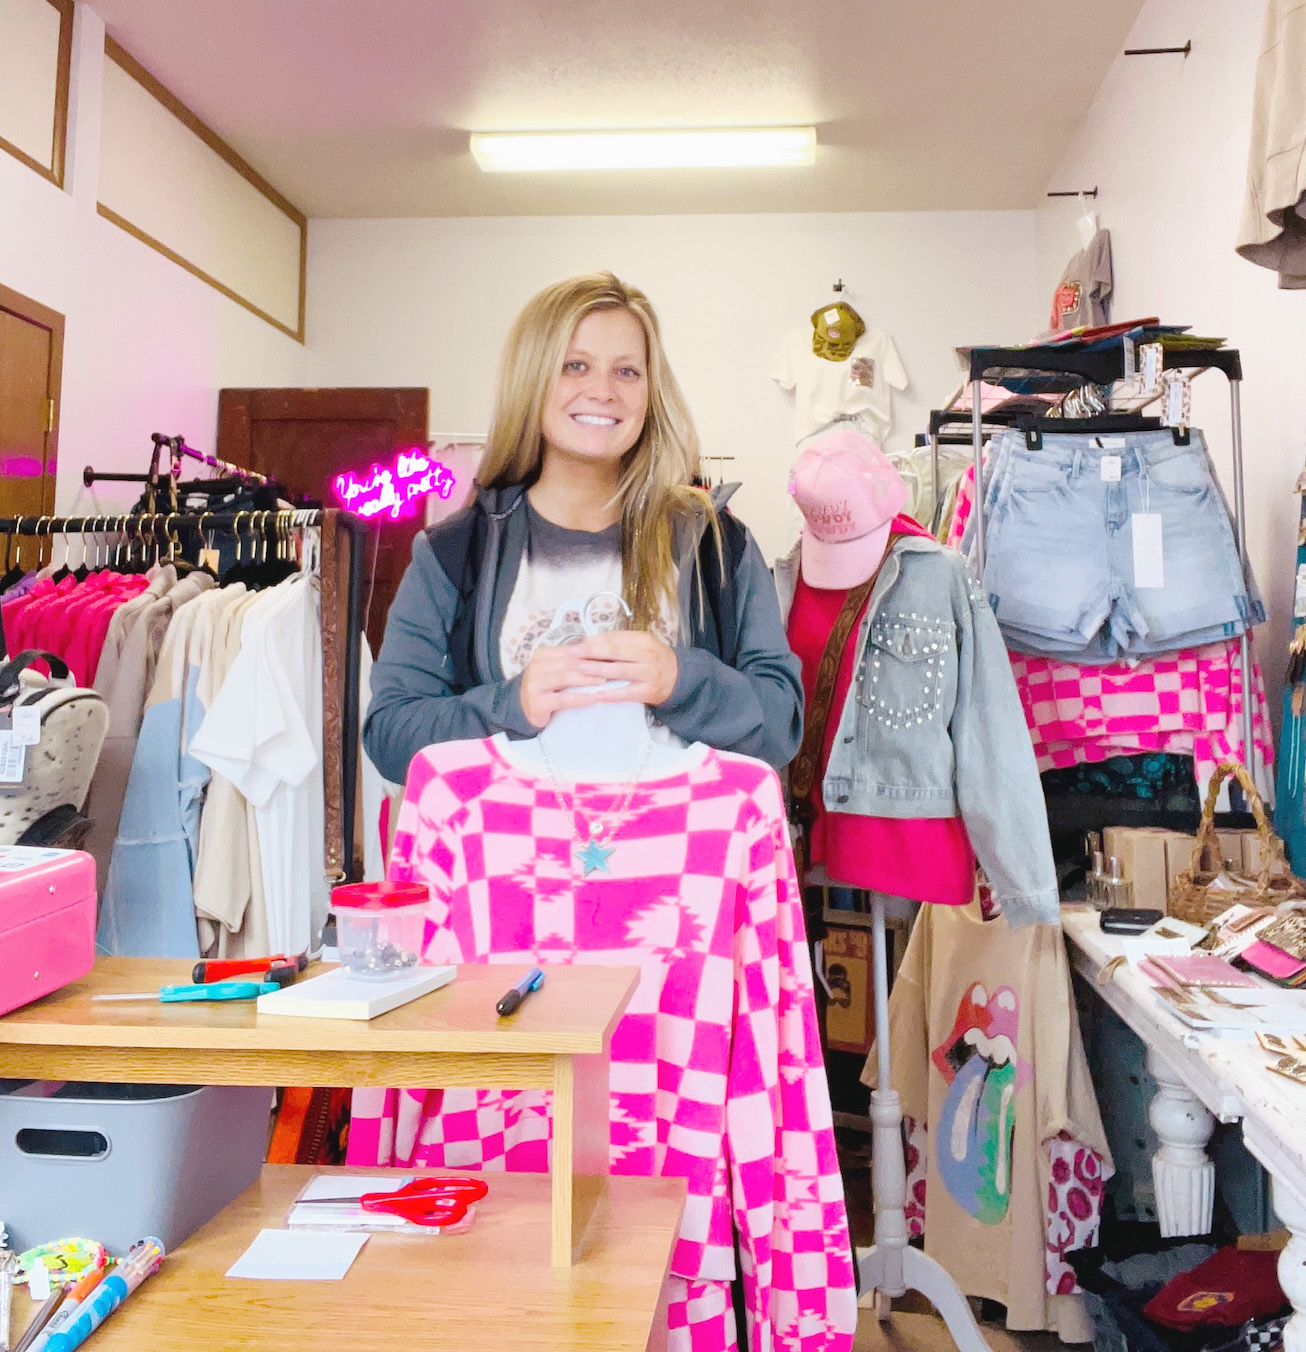 A woman stands in a clothing store behind a pink shirt with geometric patterns